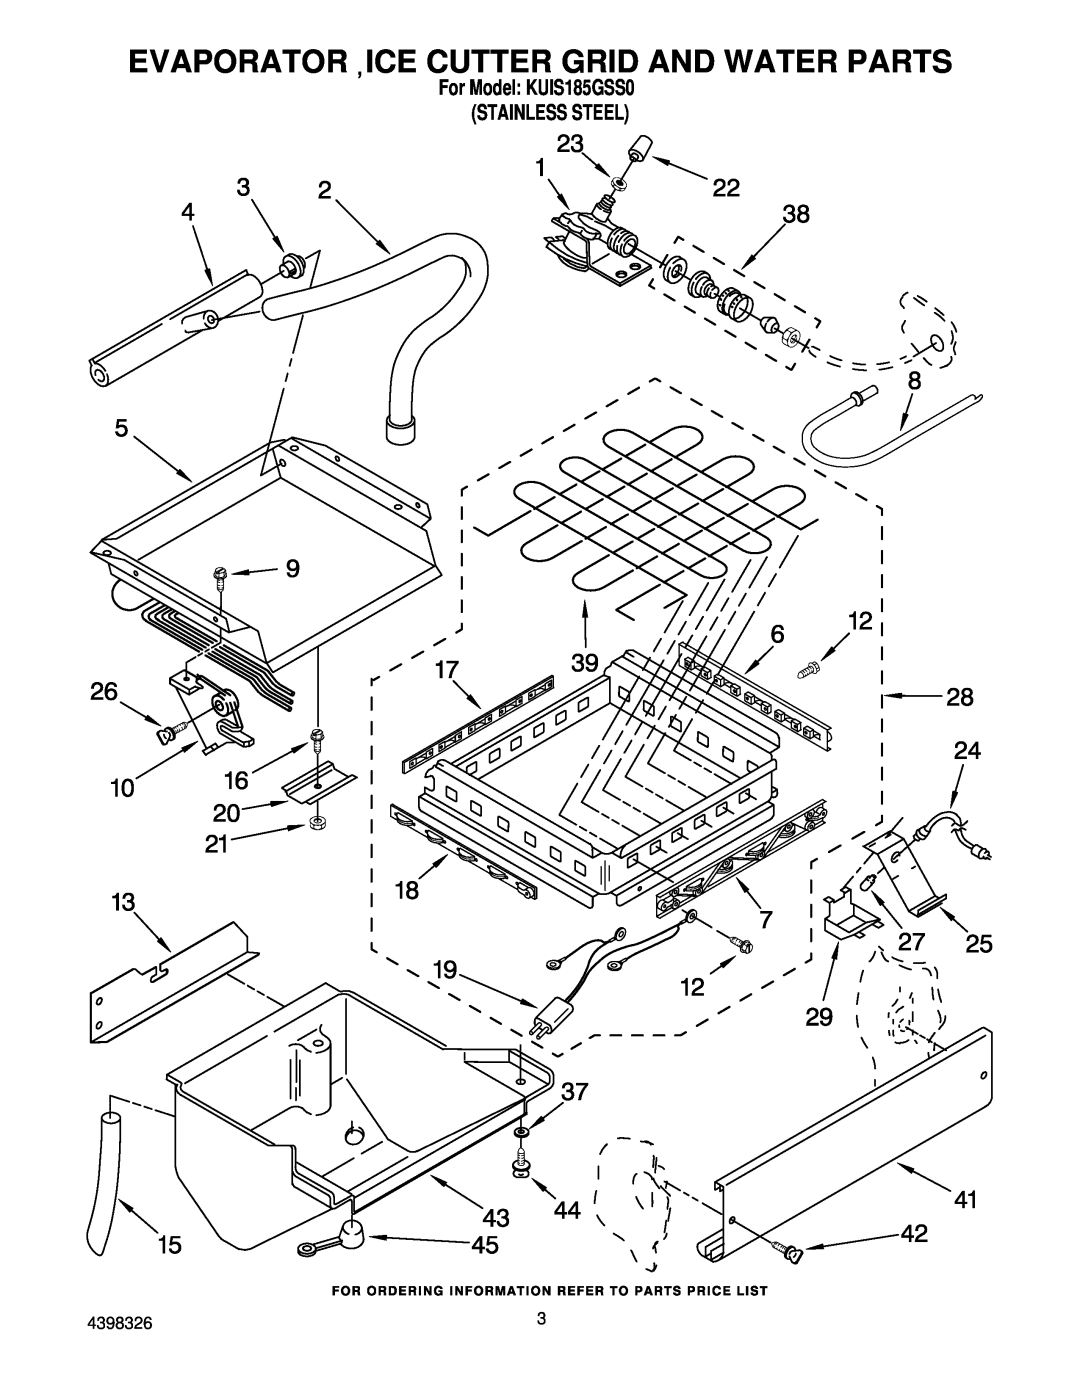 KitchenAid manual Evaporator Ice Cutter Grid And Water Parts, For Model KUIS185GSS0 STAINLESS STEEL 